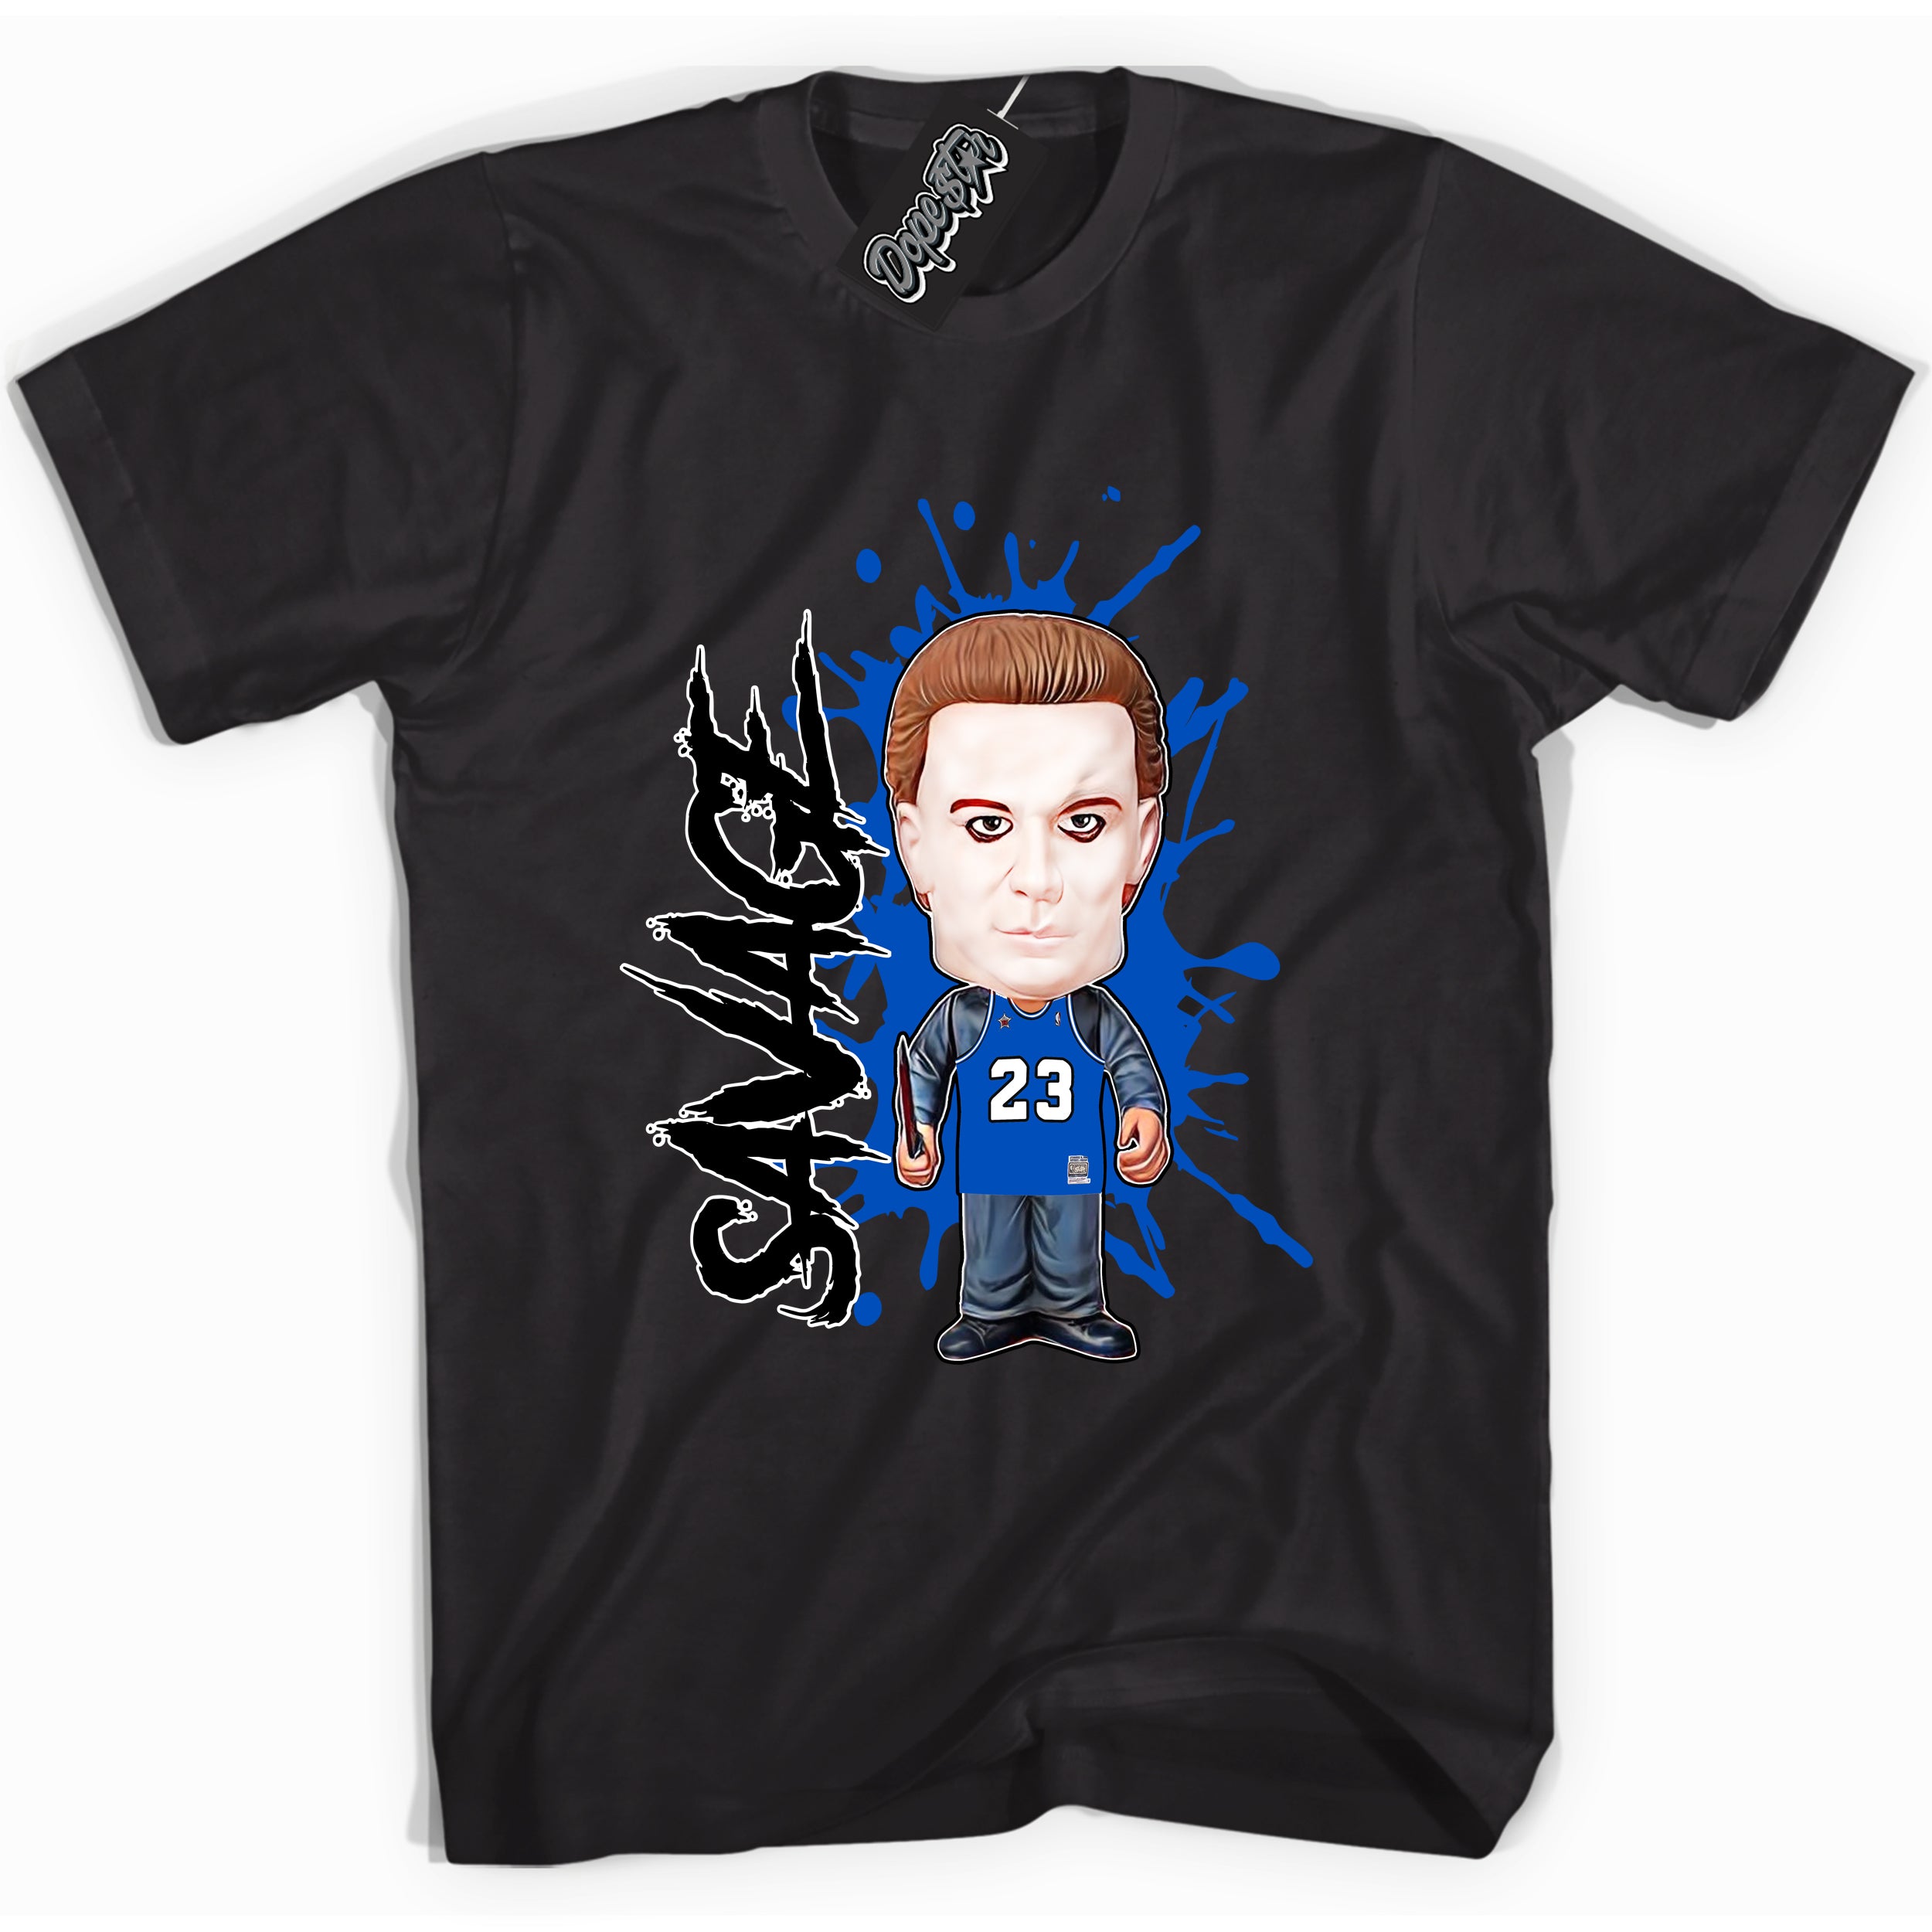 Cool Black graphic tee with Michael Myers Savage print, that perfectly matches OG Royal Reimagined 1s sneakers 